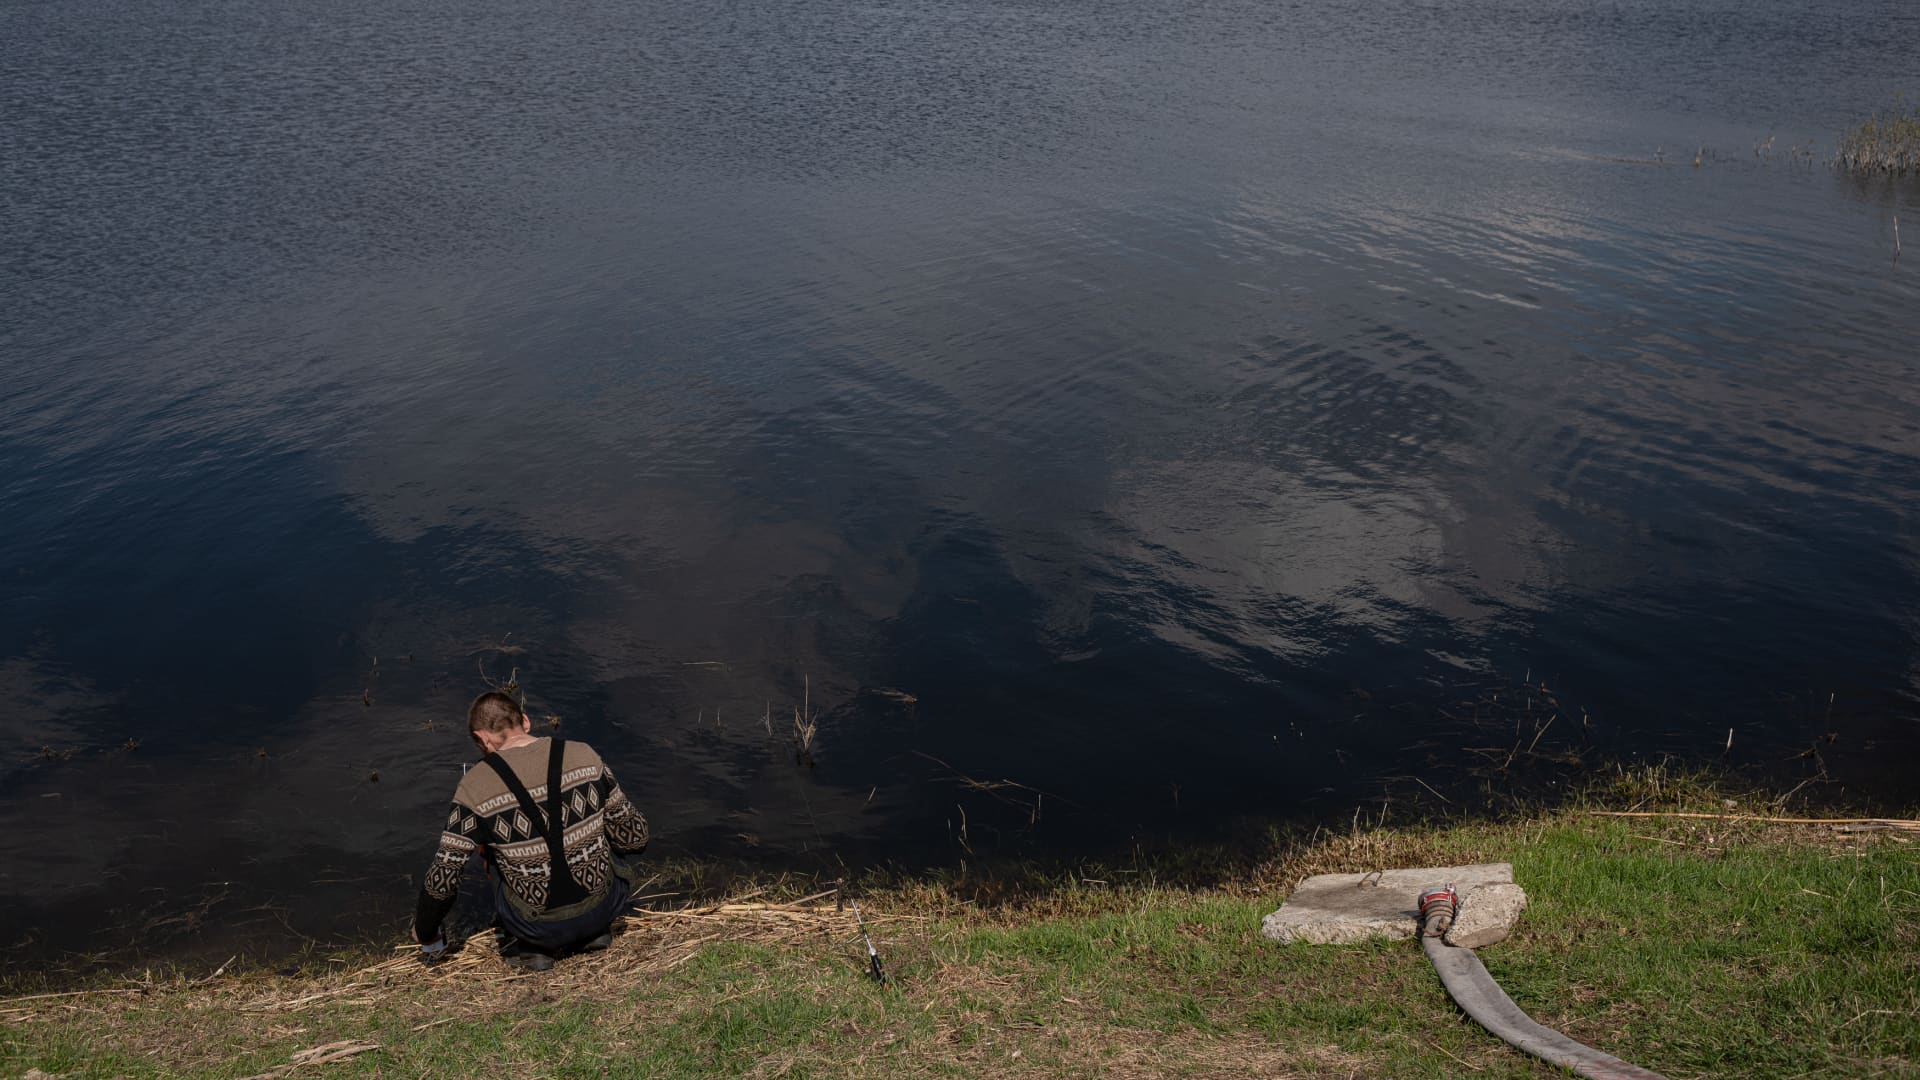 Oleksandr, 39, sits by the flooded field as he takes a smoking break after fixing the engine pumping out the water from the flooded areas, on May 2, 2022 in Demydiv, Ukraine.